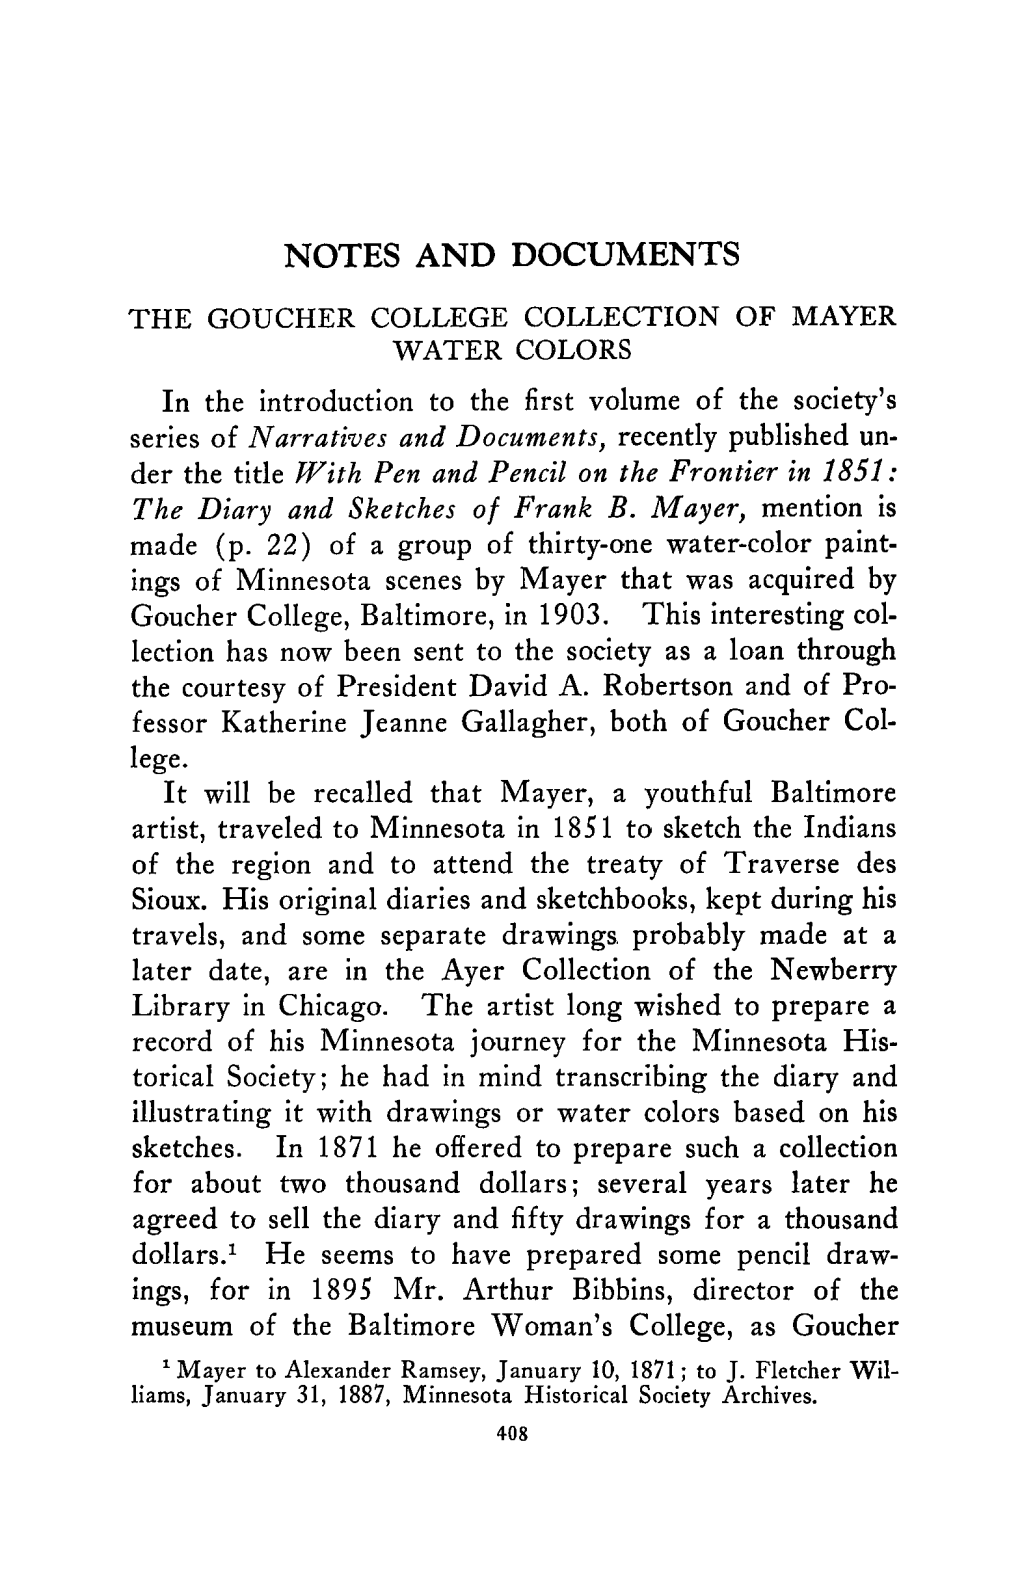 The Goucher College Collection of Mayer Water Colors